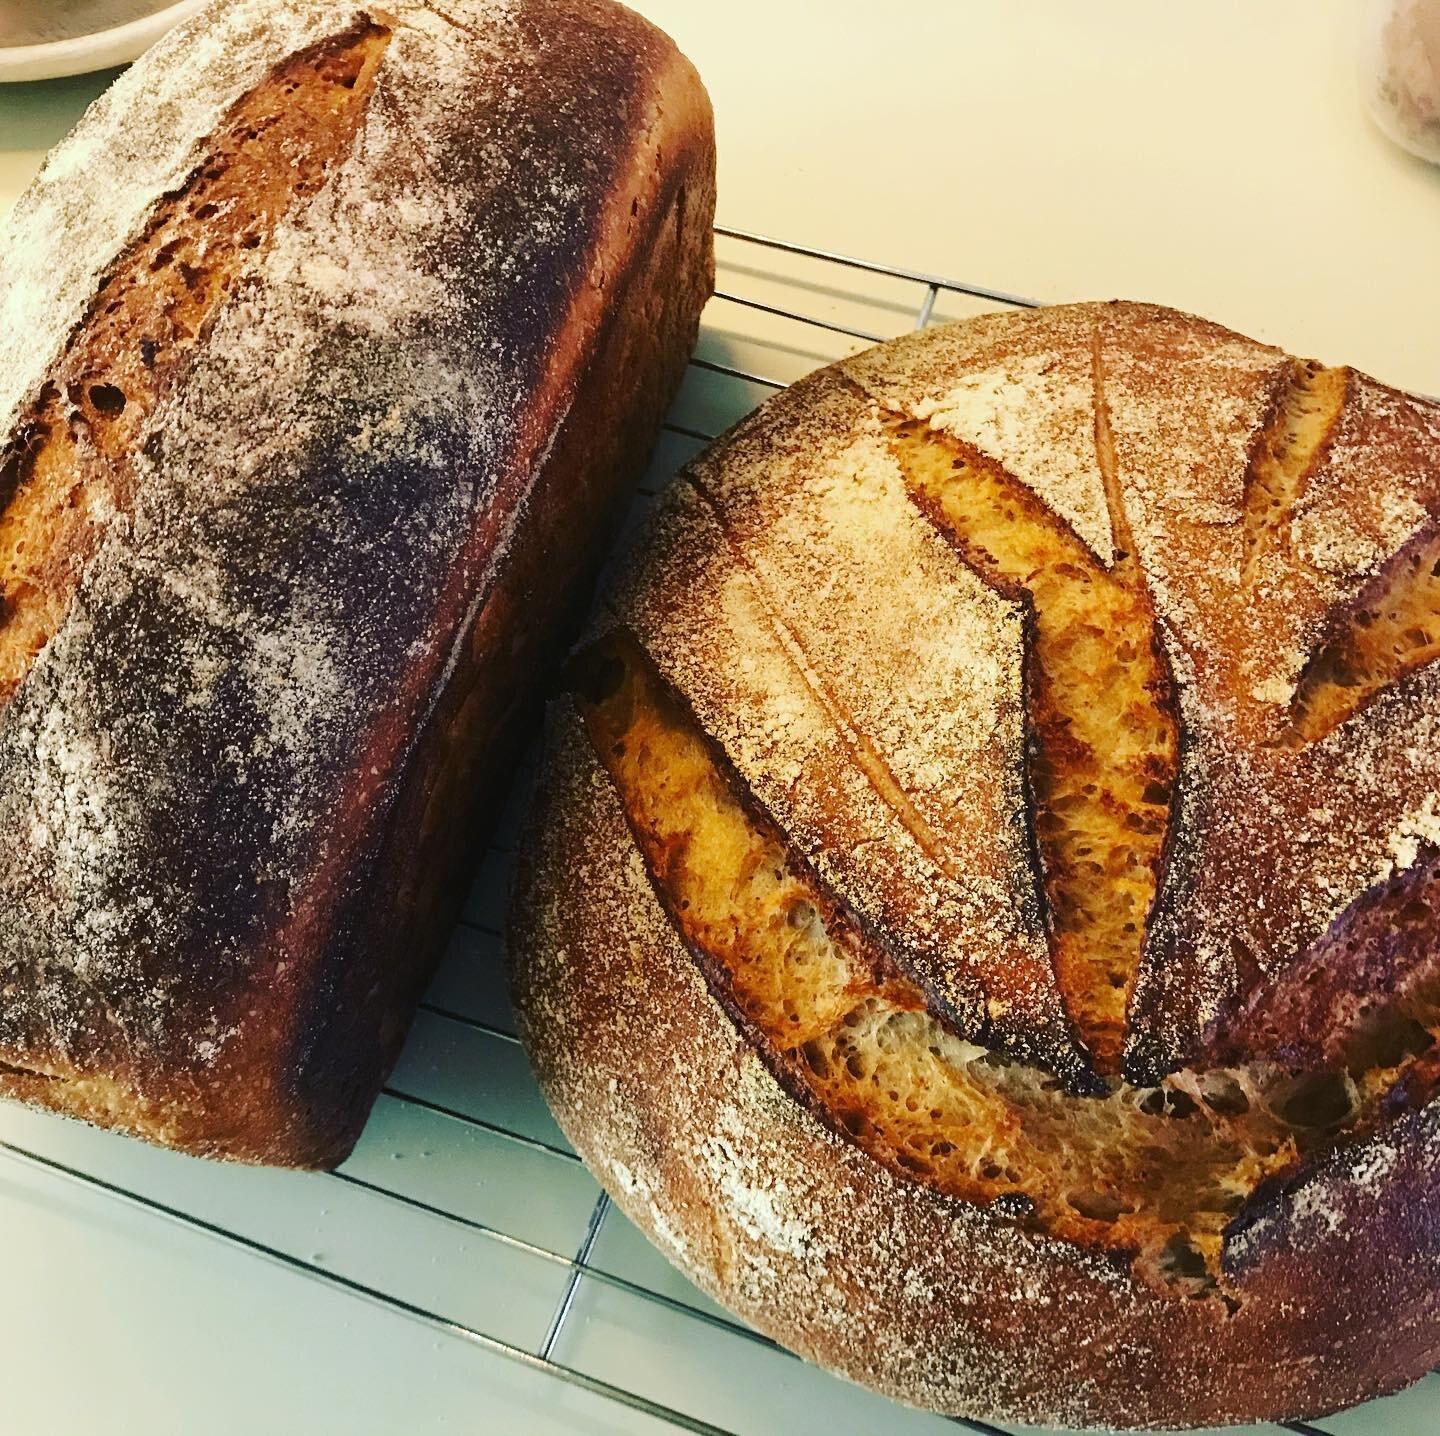 Friday baking ❤️ makes our home cosy!
#sourdough #homebaker